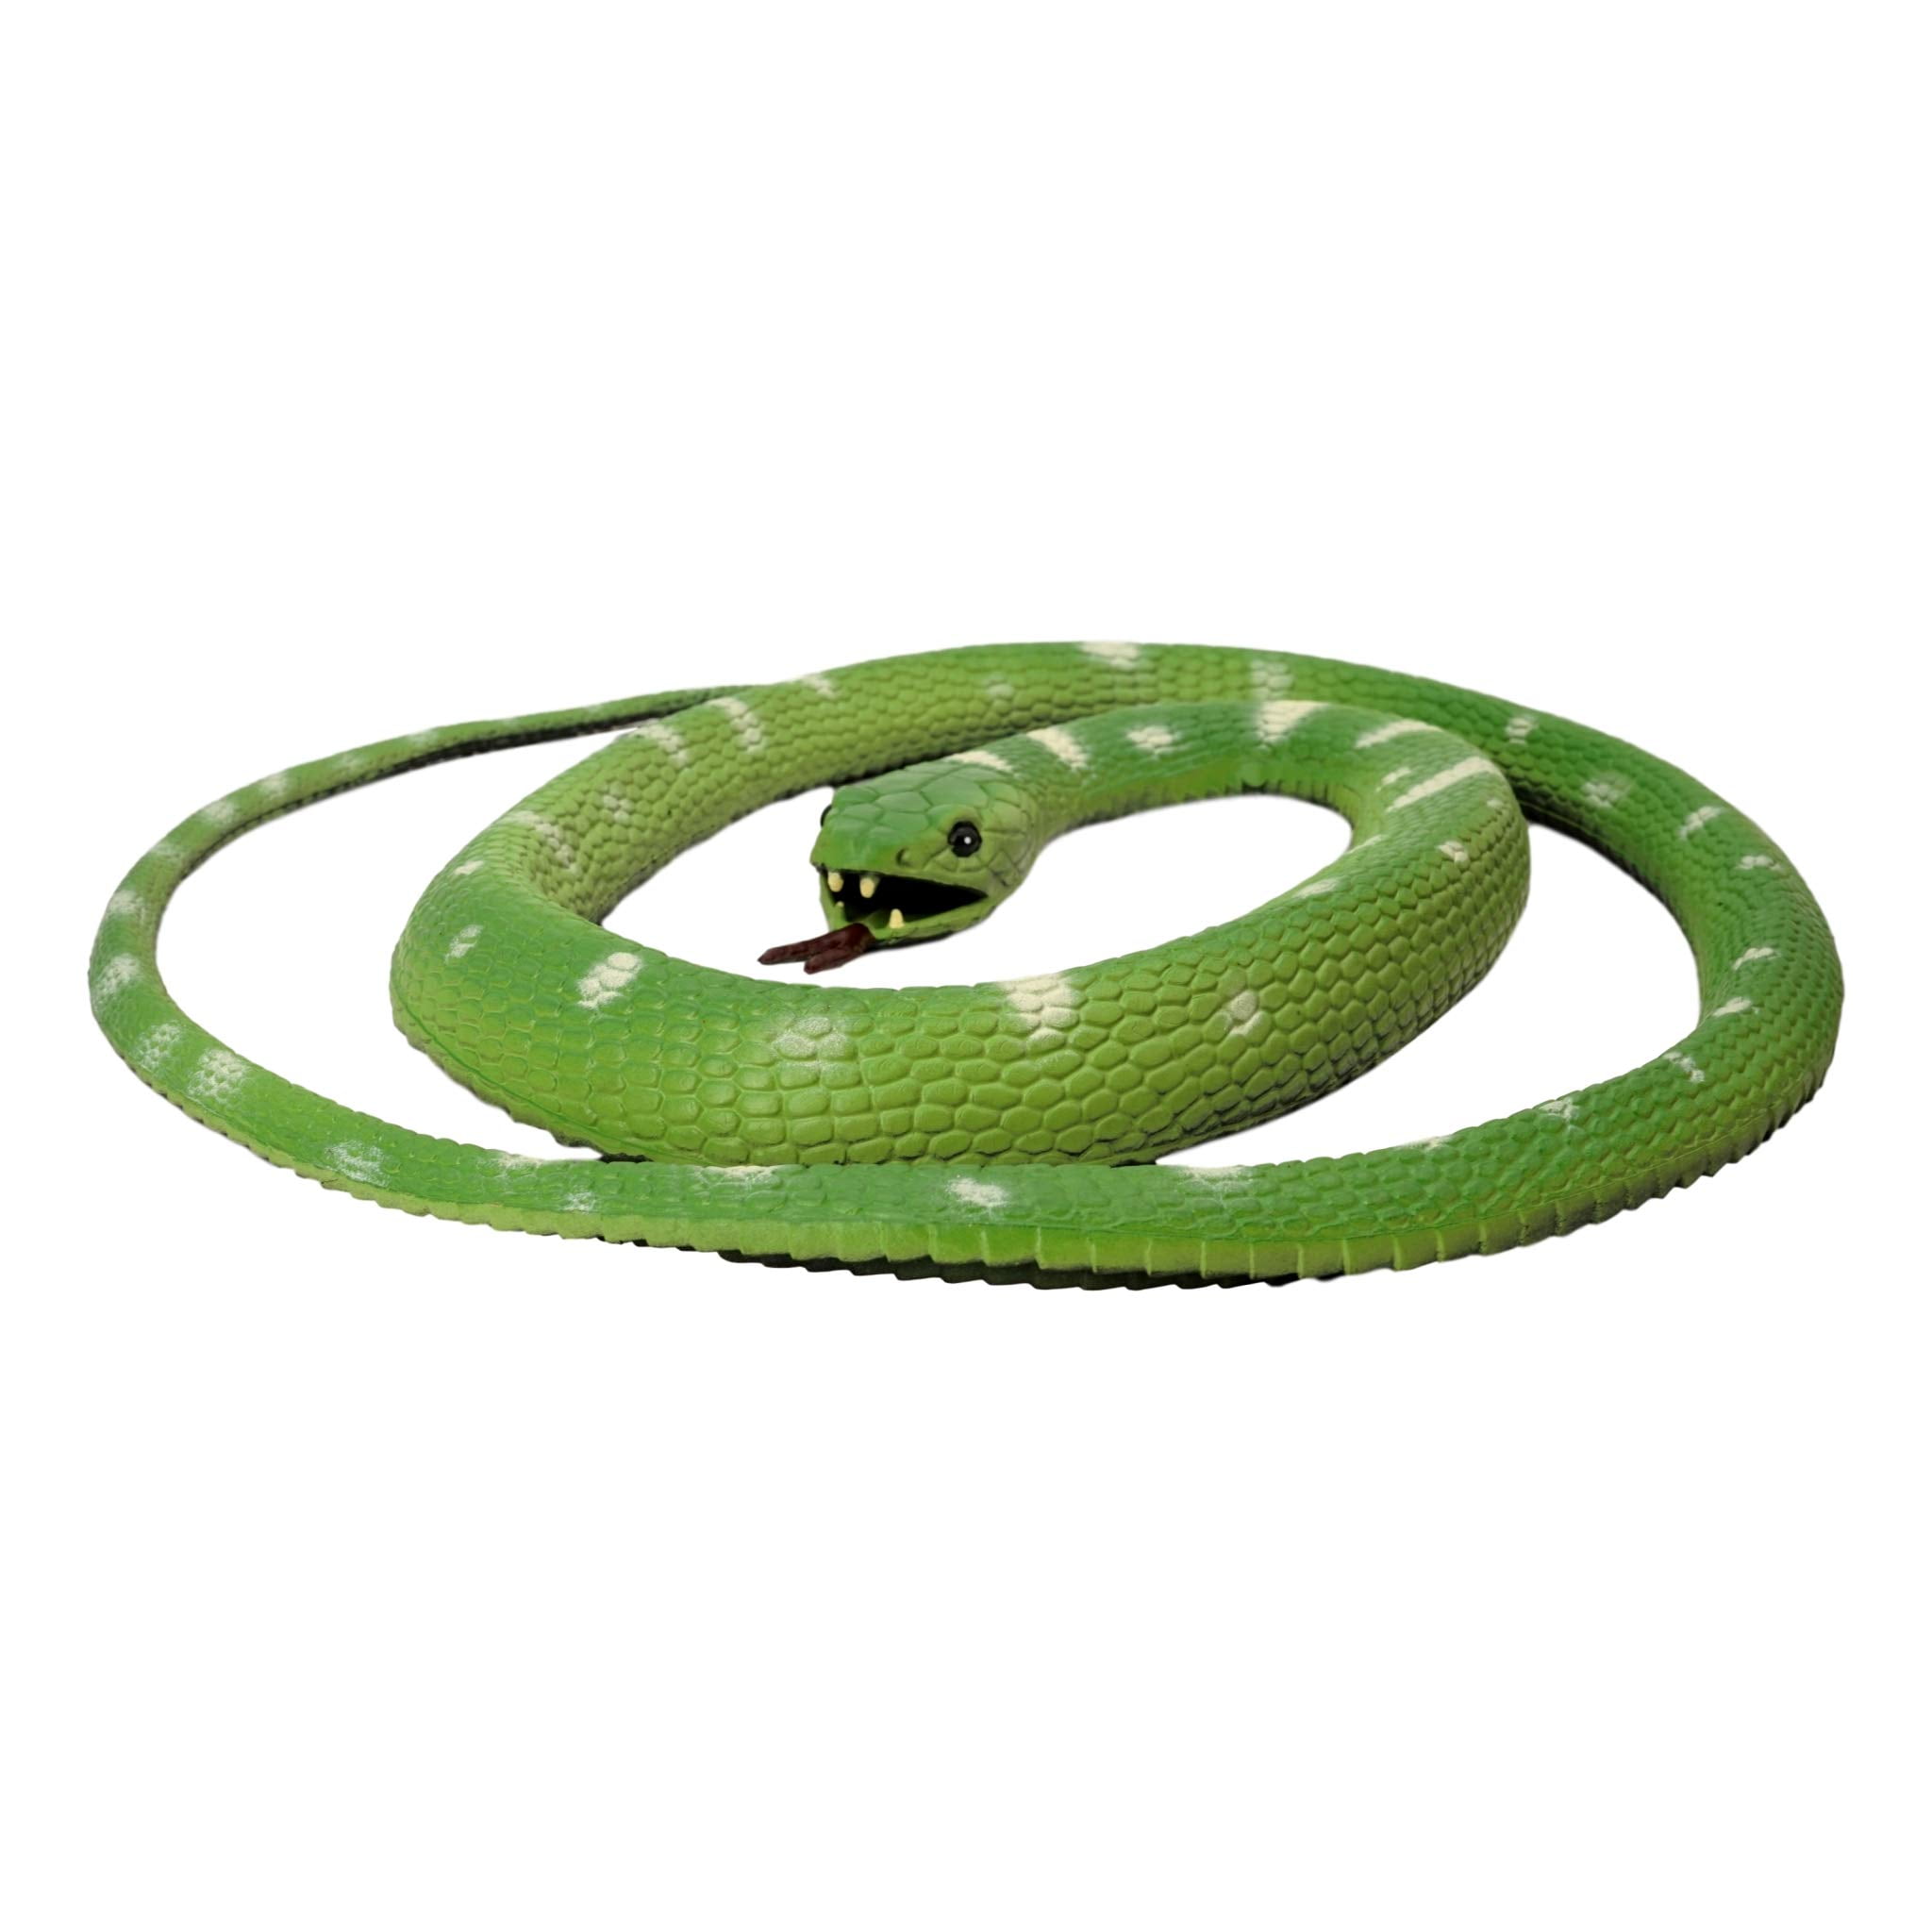 Rubber Coiled Snake (76 in, Green and White) Long, Realistic , Toy ...